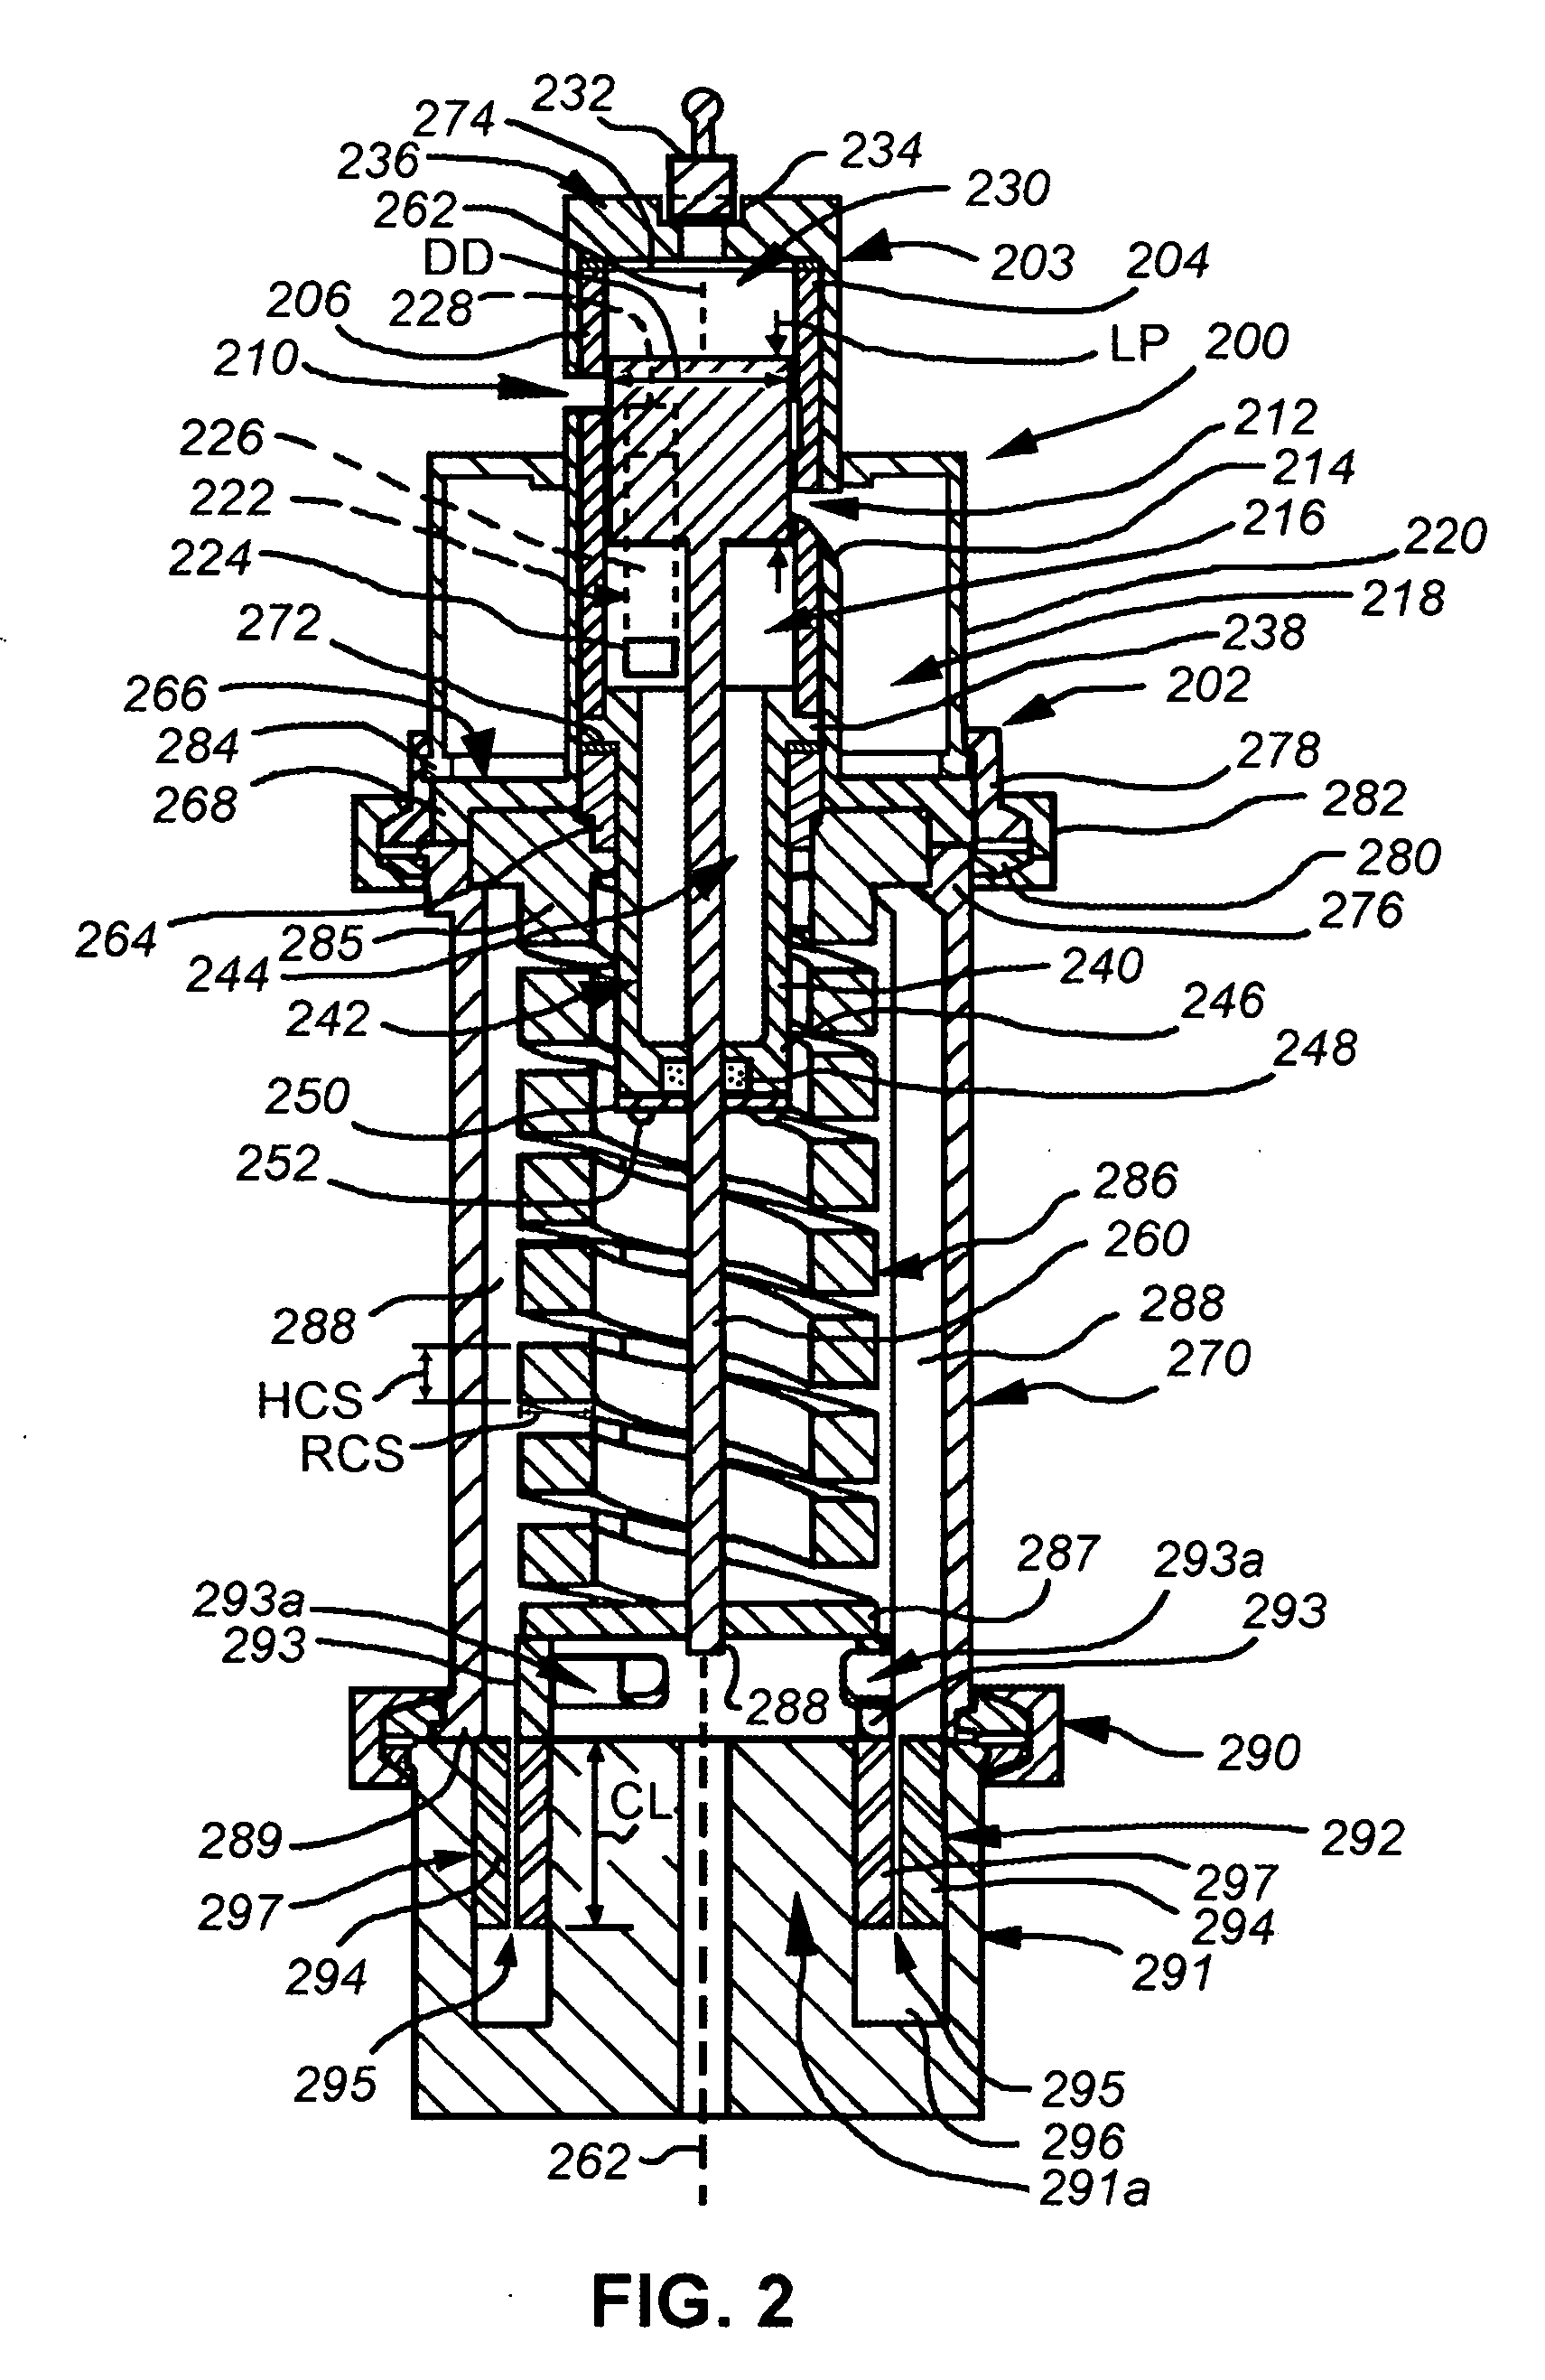 System and method for controlling a power generating system